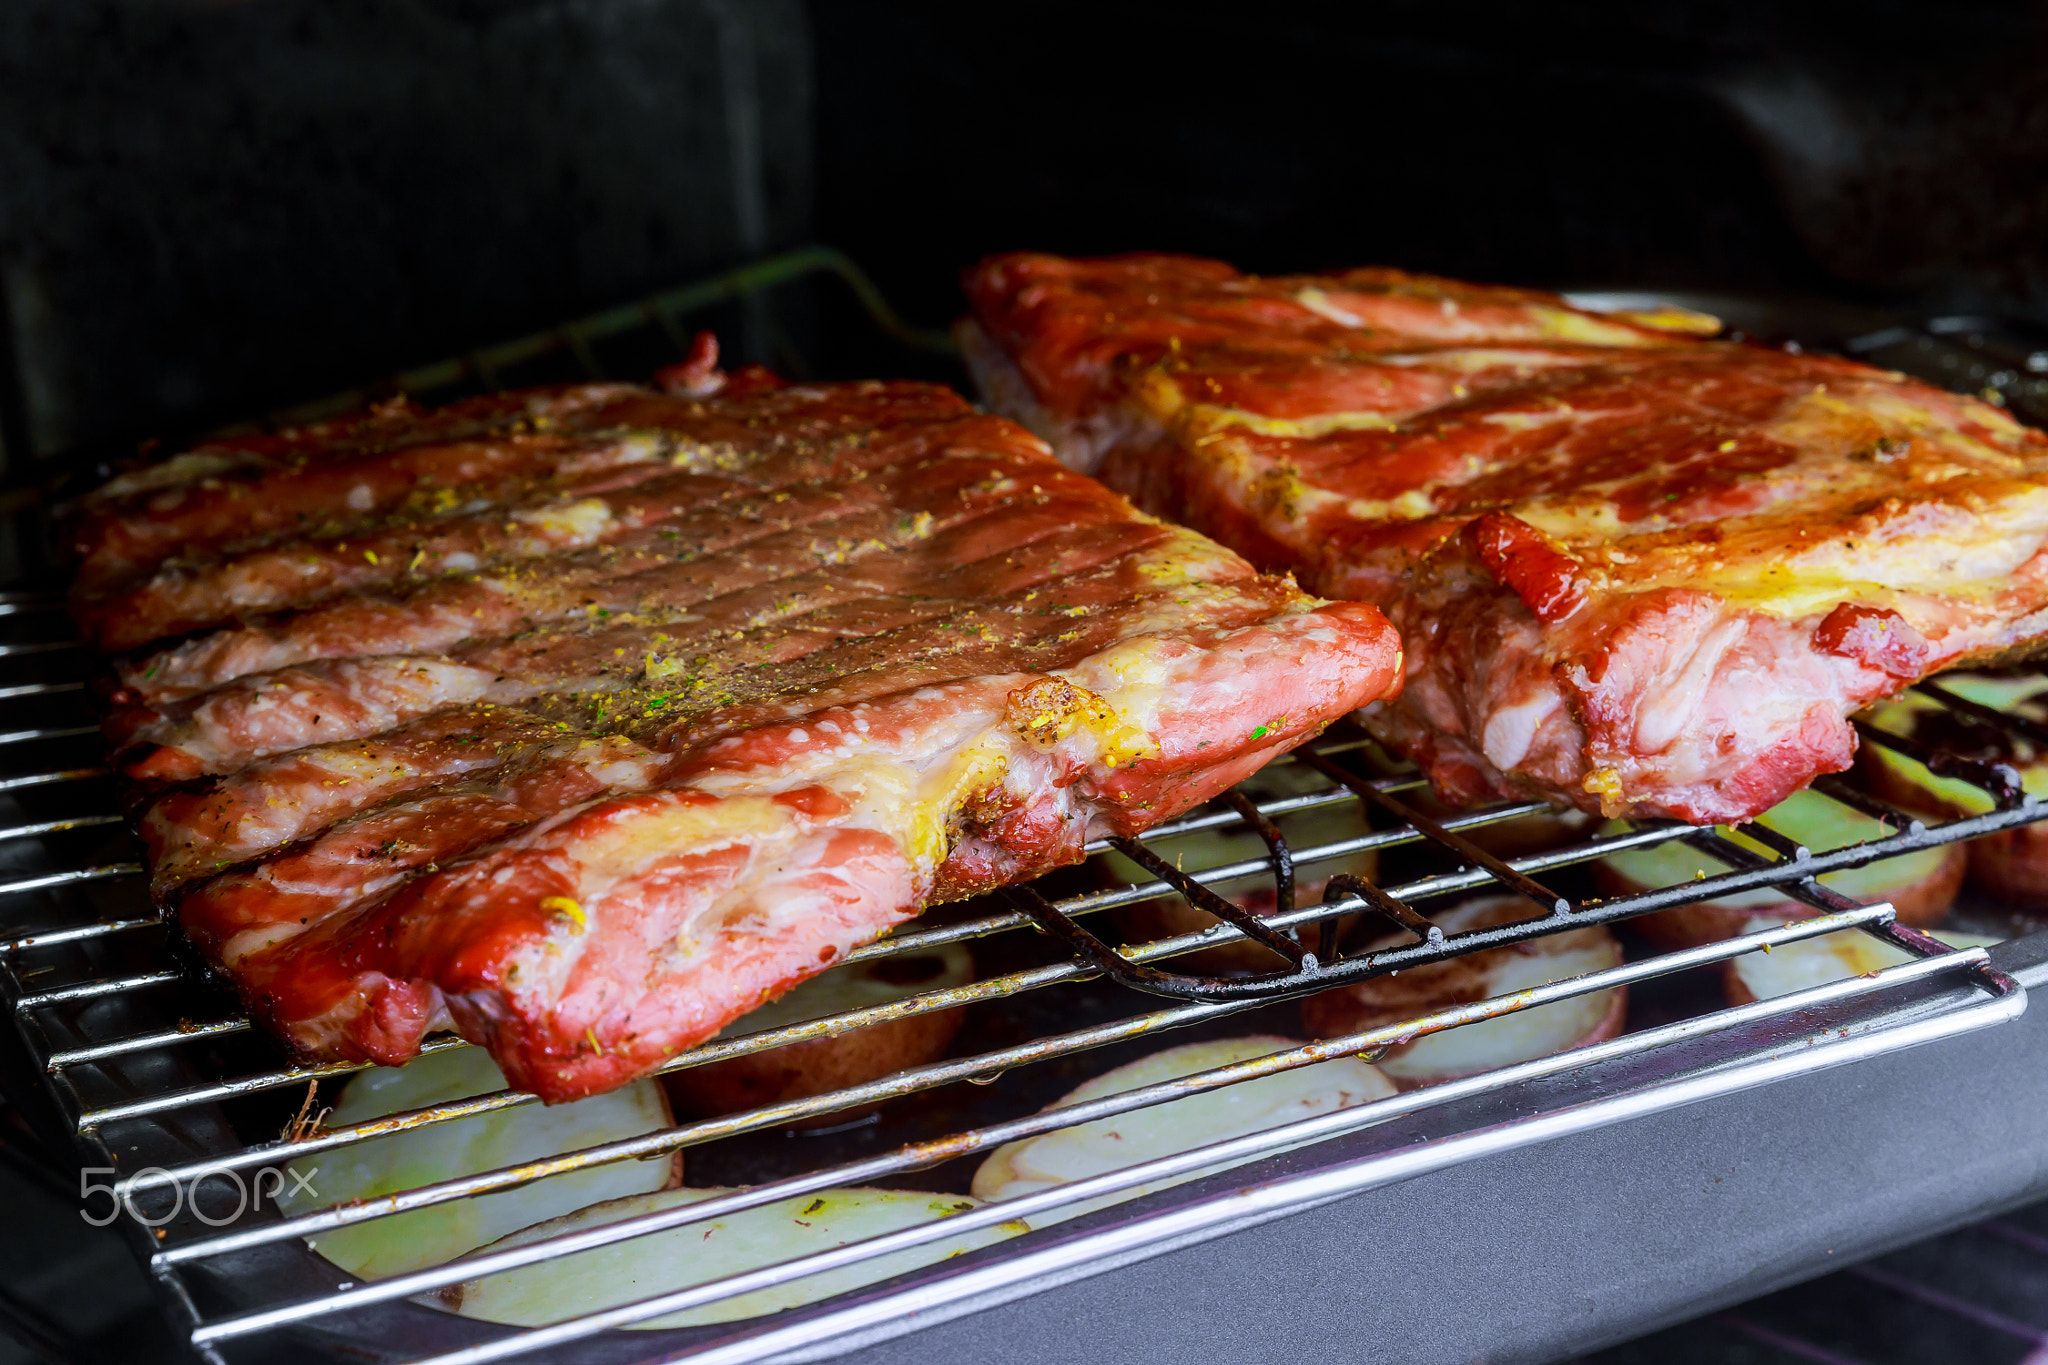 pork ribs and potatoes in the oven